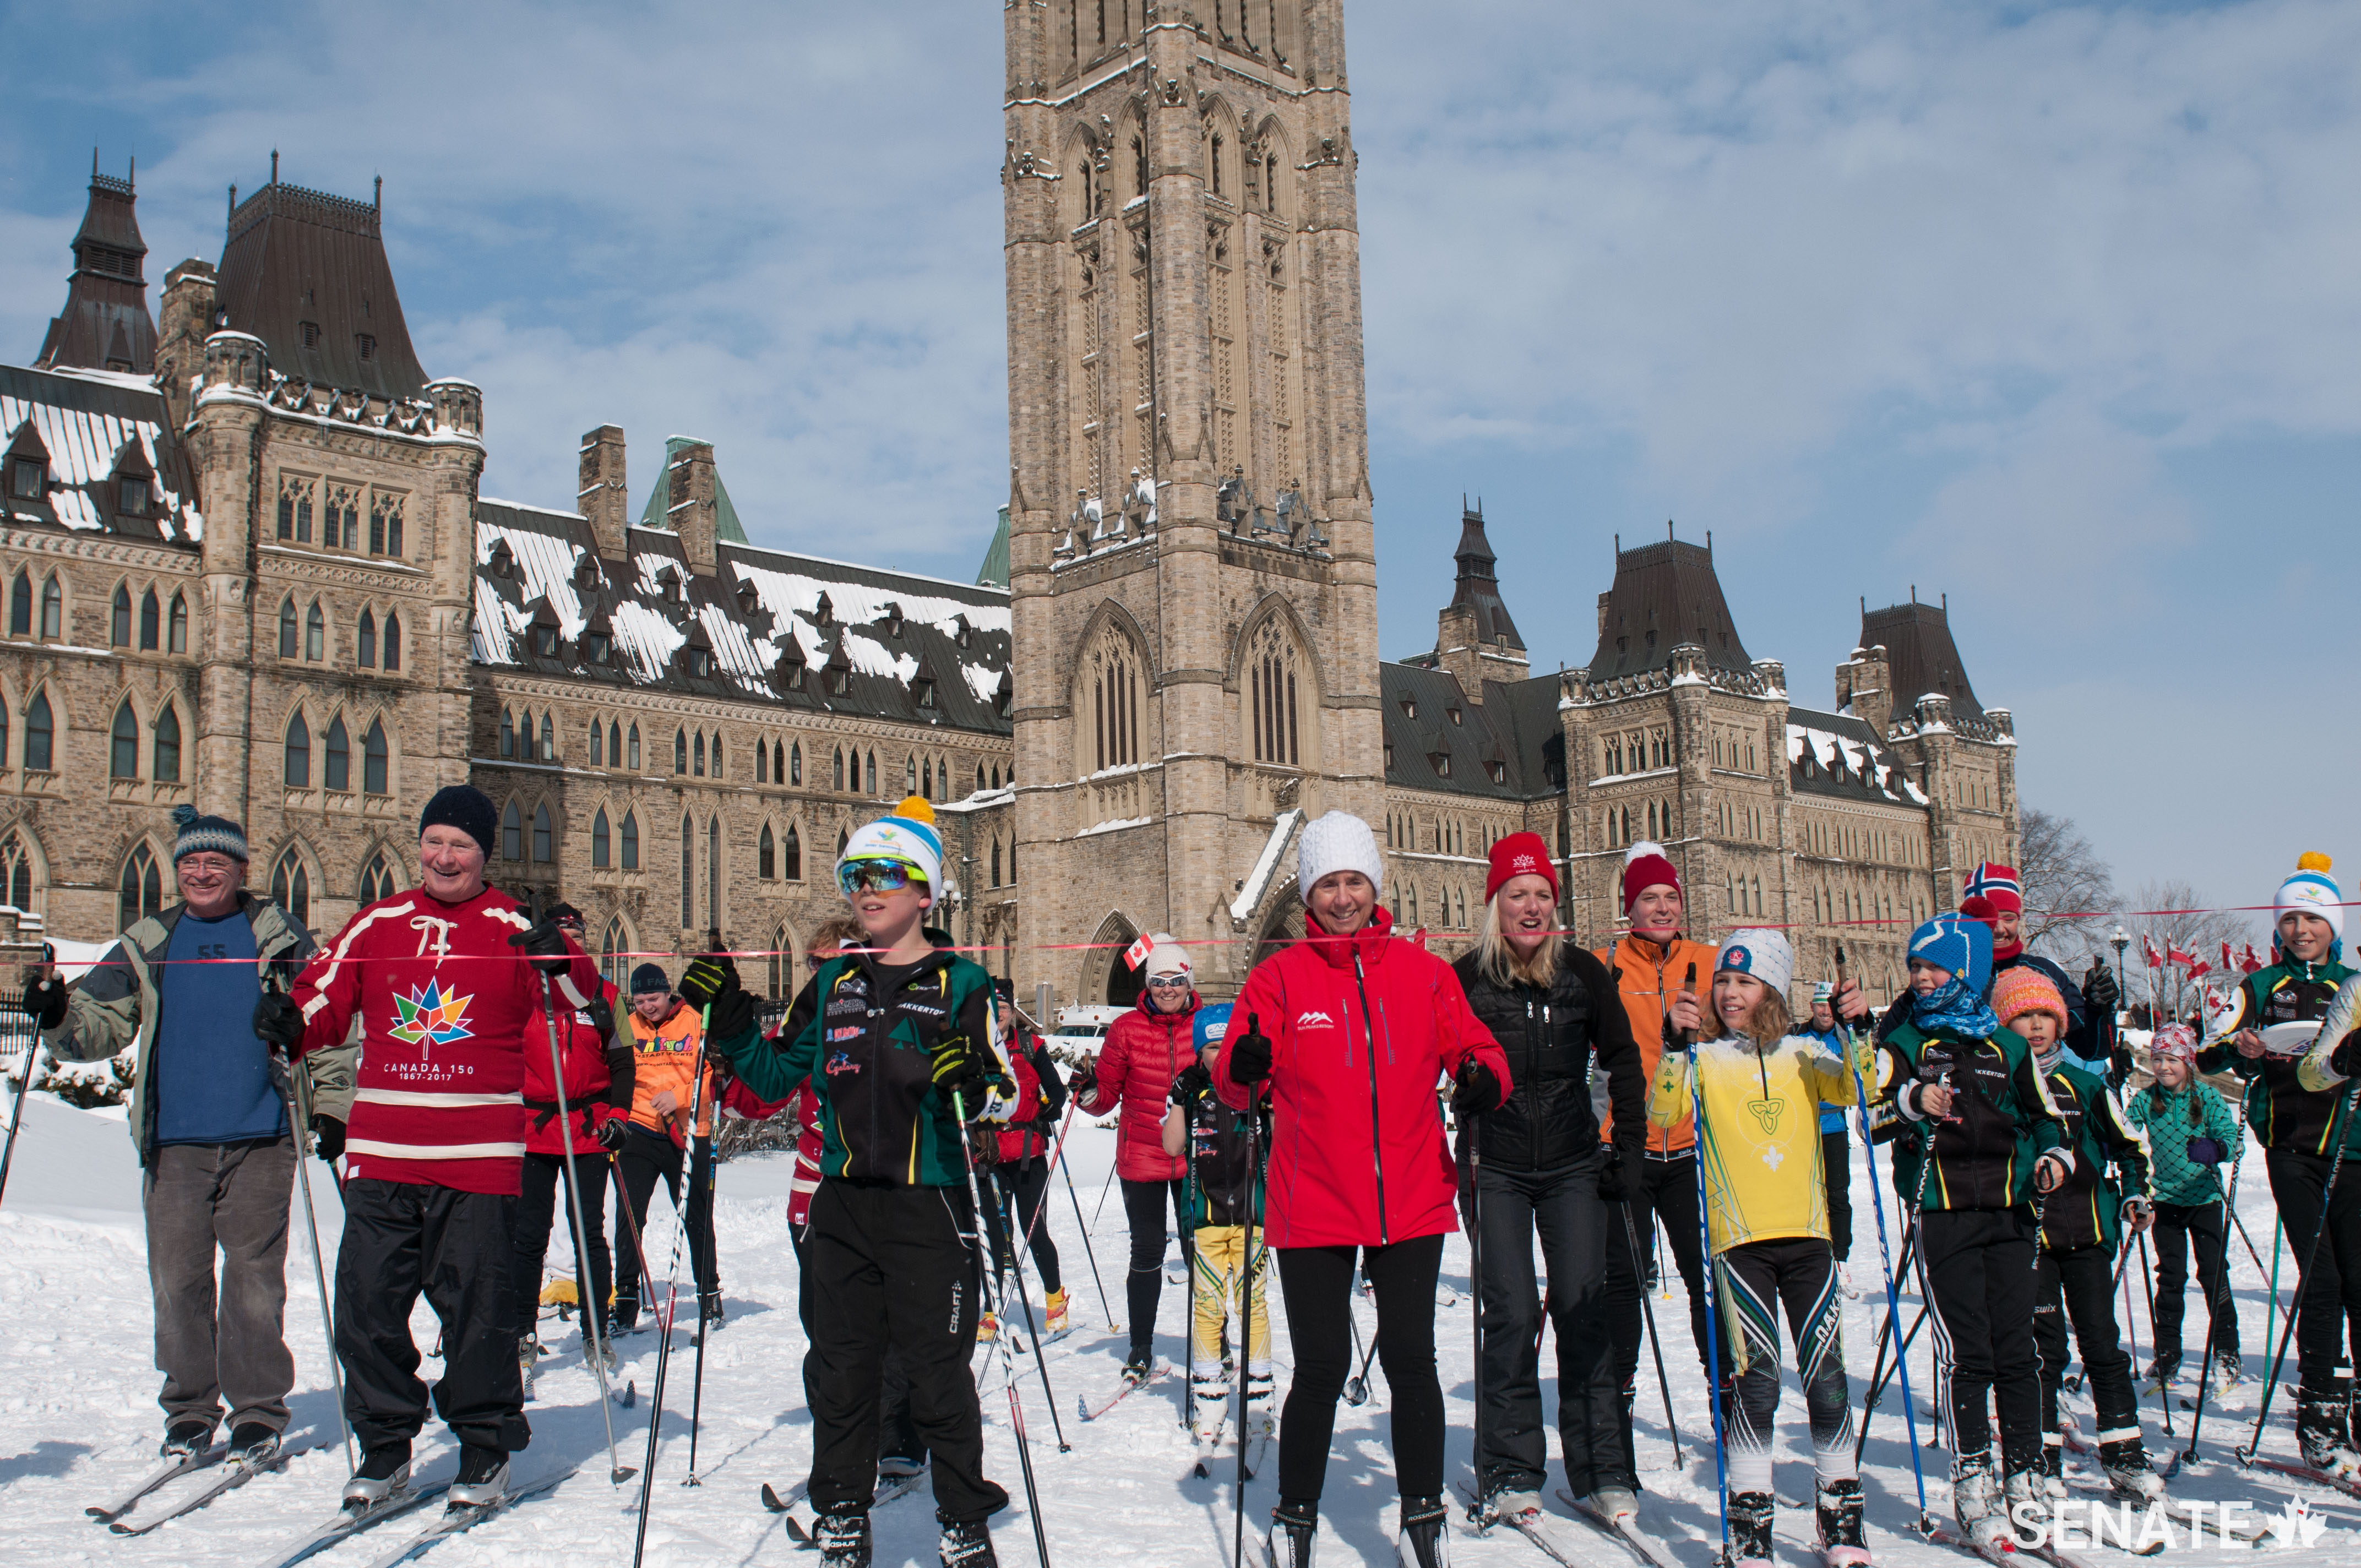 Governor General David Johnston joined a group of dignitaries and children for Ski Day on the Hill. Also taking part were Senators Raine and Patterson, Federal Environment Minister Catherine McKenna and Norwegian Ambassador Anne Ovind. The group is shown here arriving at the finish line on Parliament Hill’s west lawn.